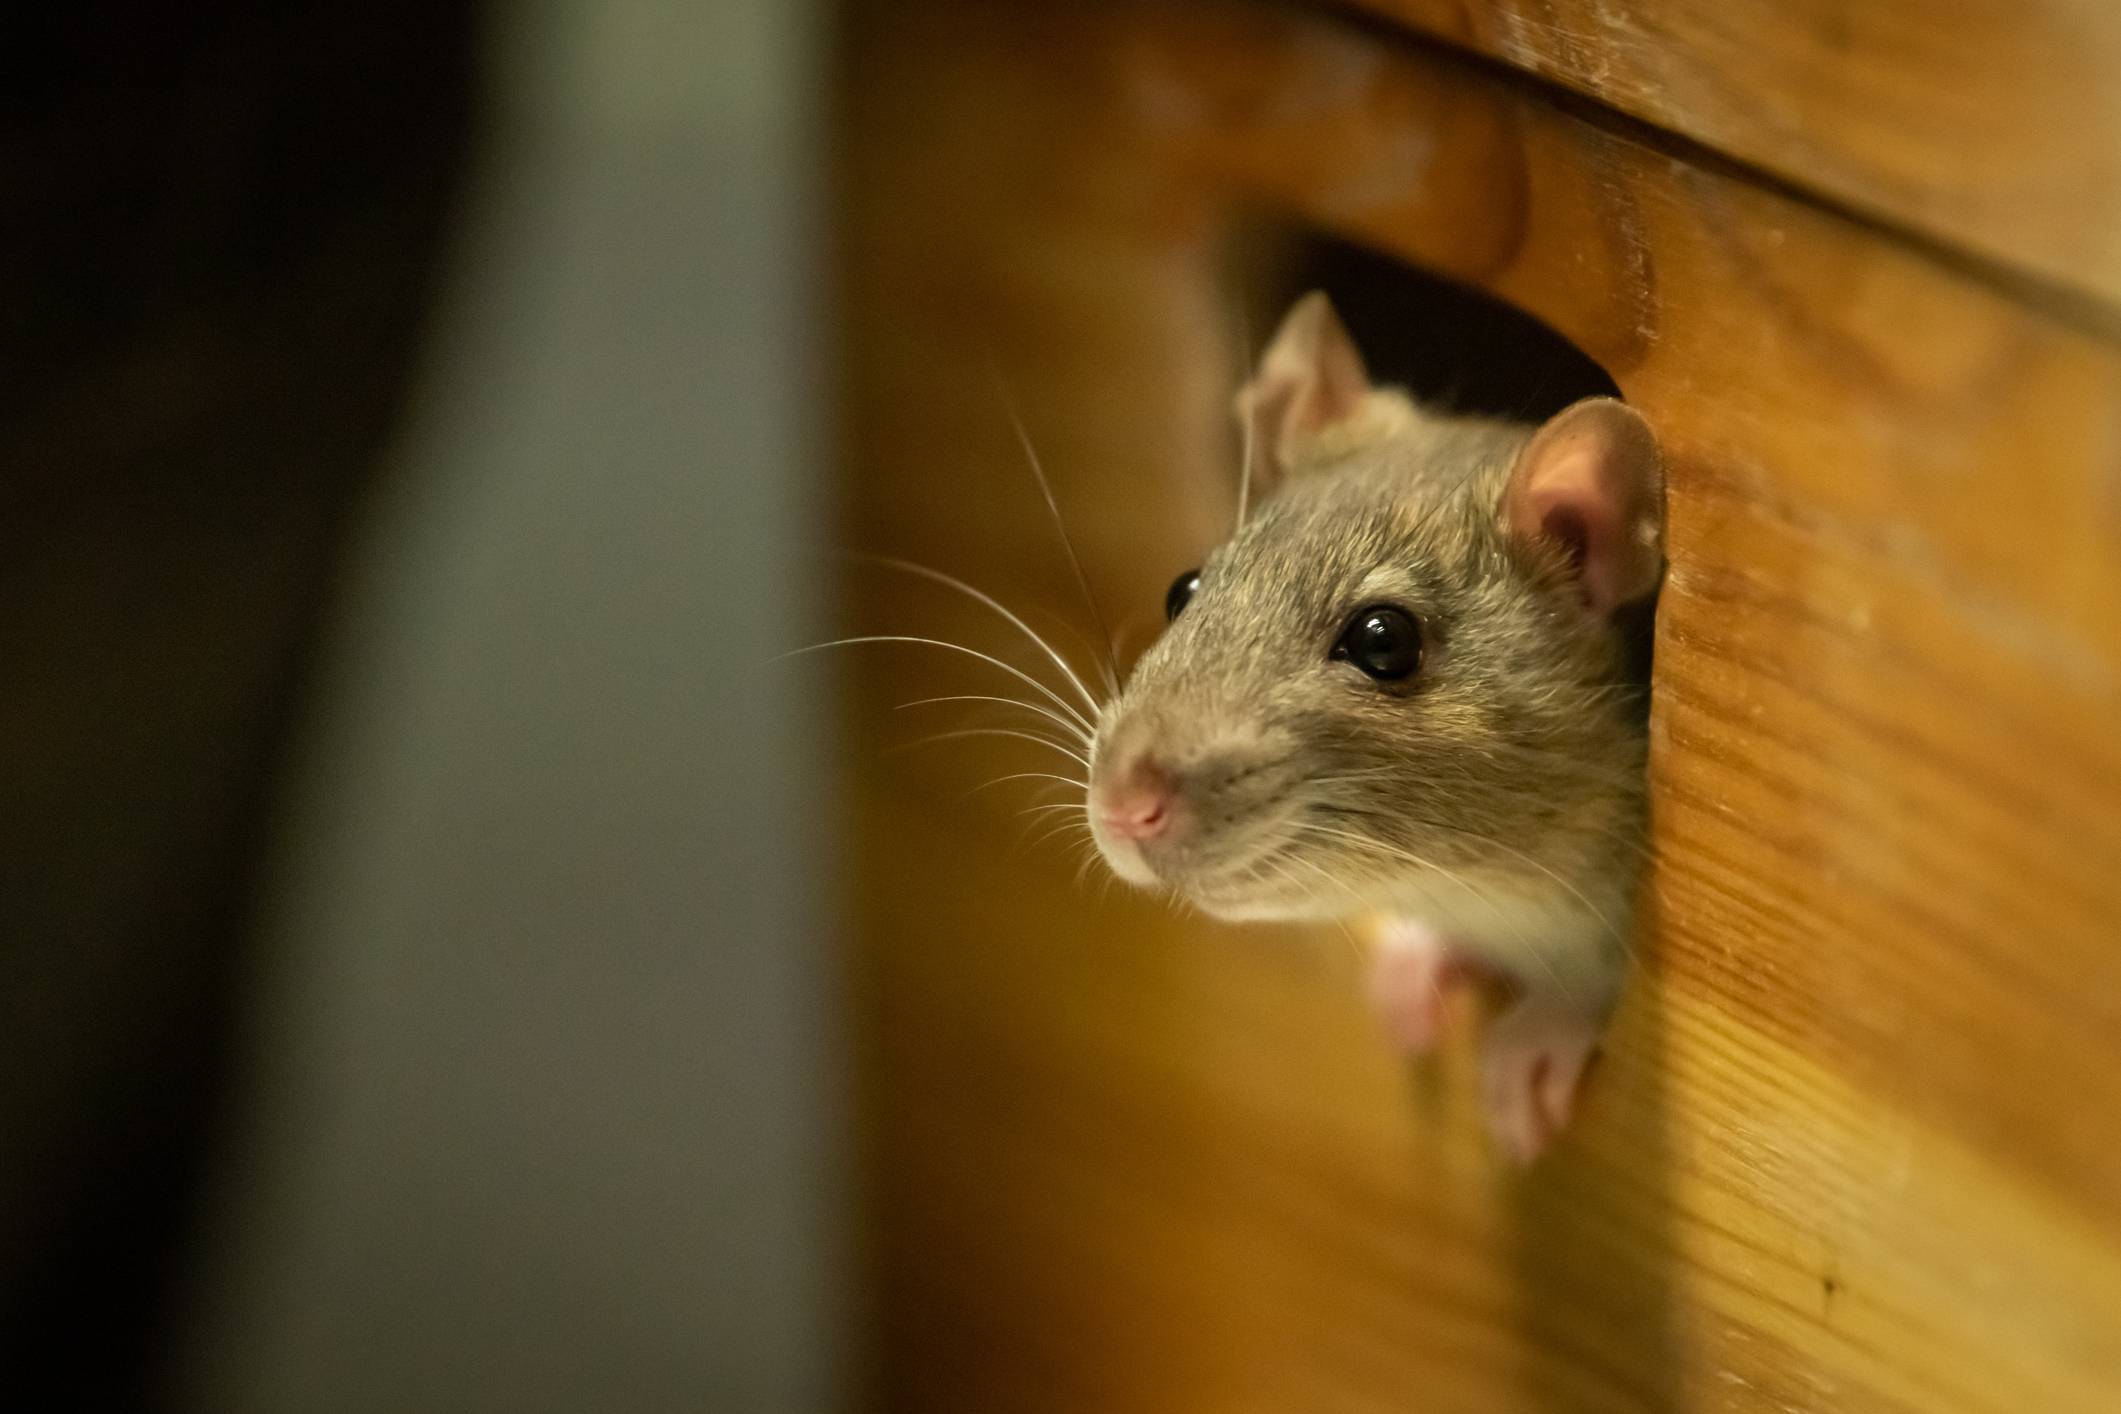 A mouse sticks their head out of a hole in the baseboard of a house.